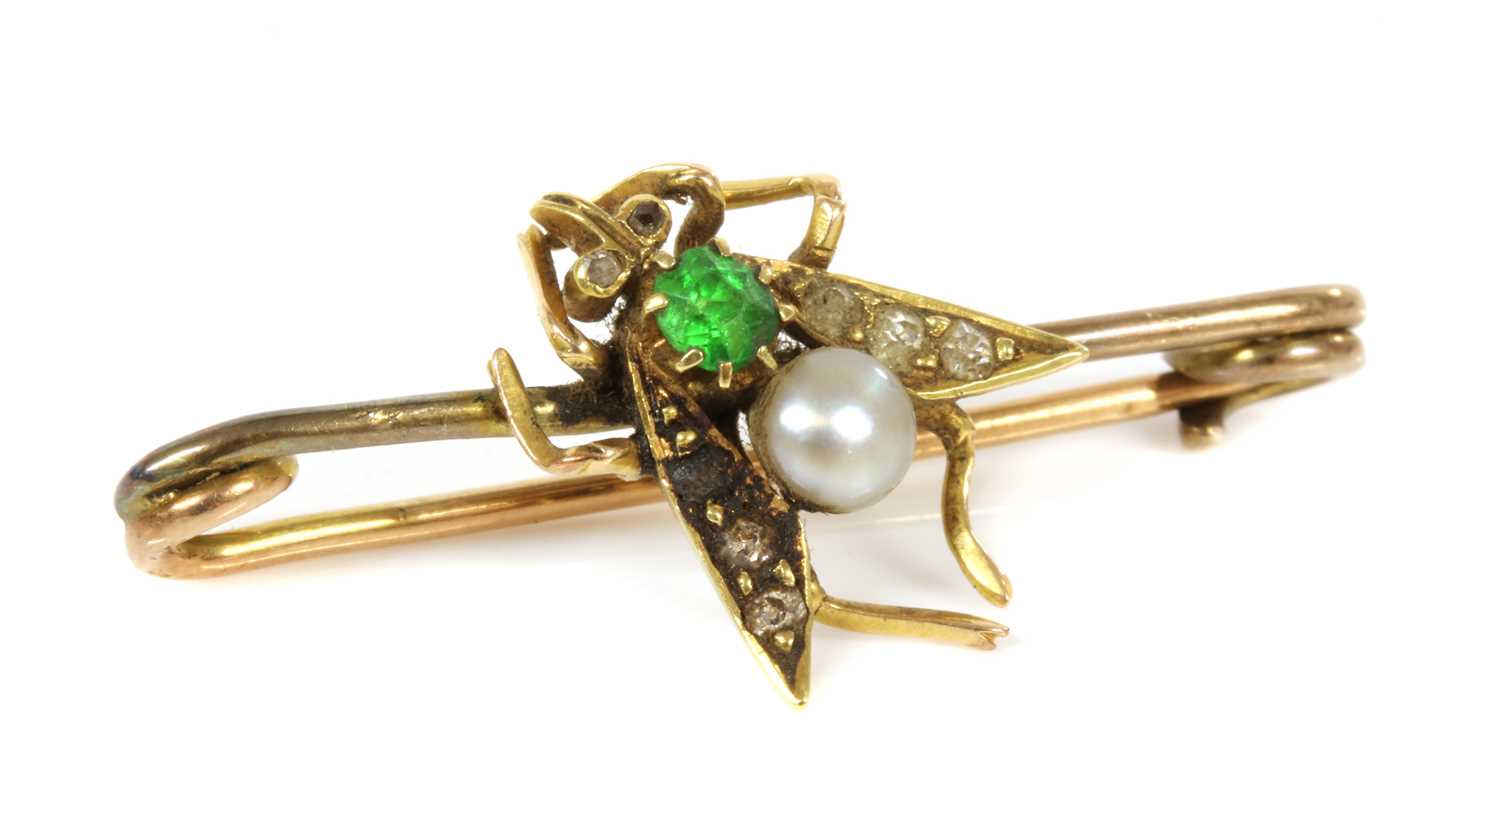 Lot 98 - A cased Victorian gem set fly or insect brooch